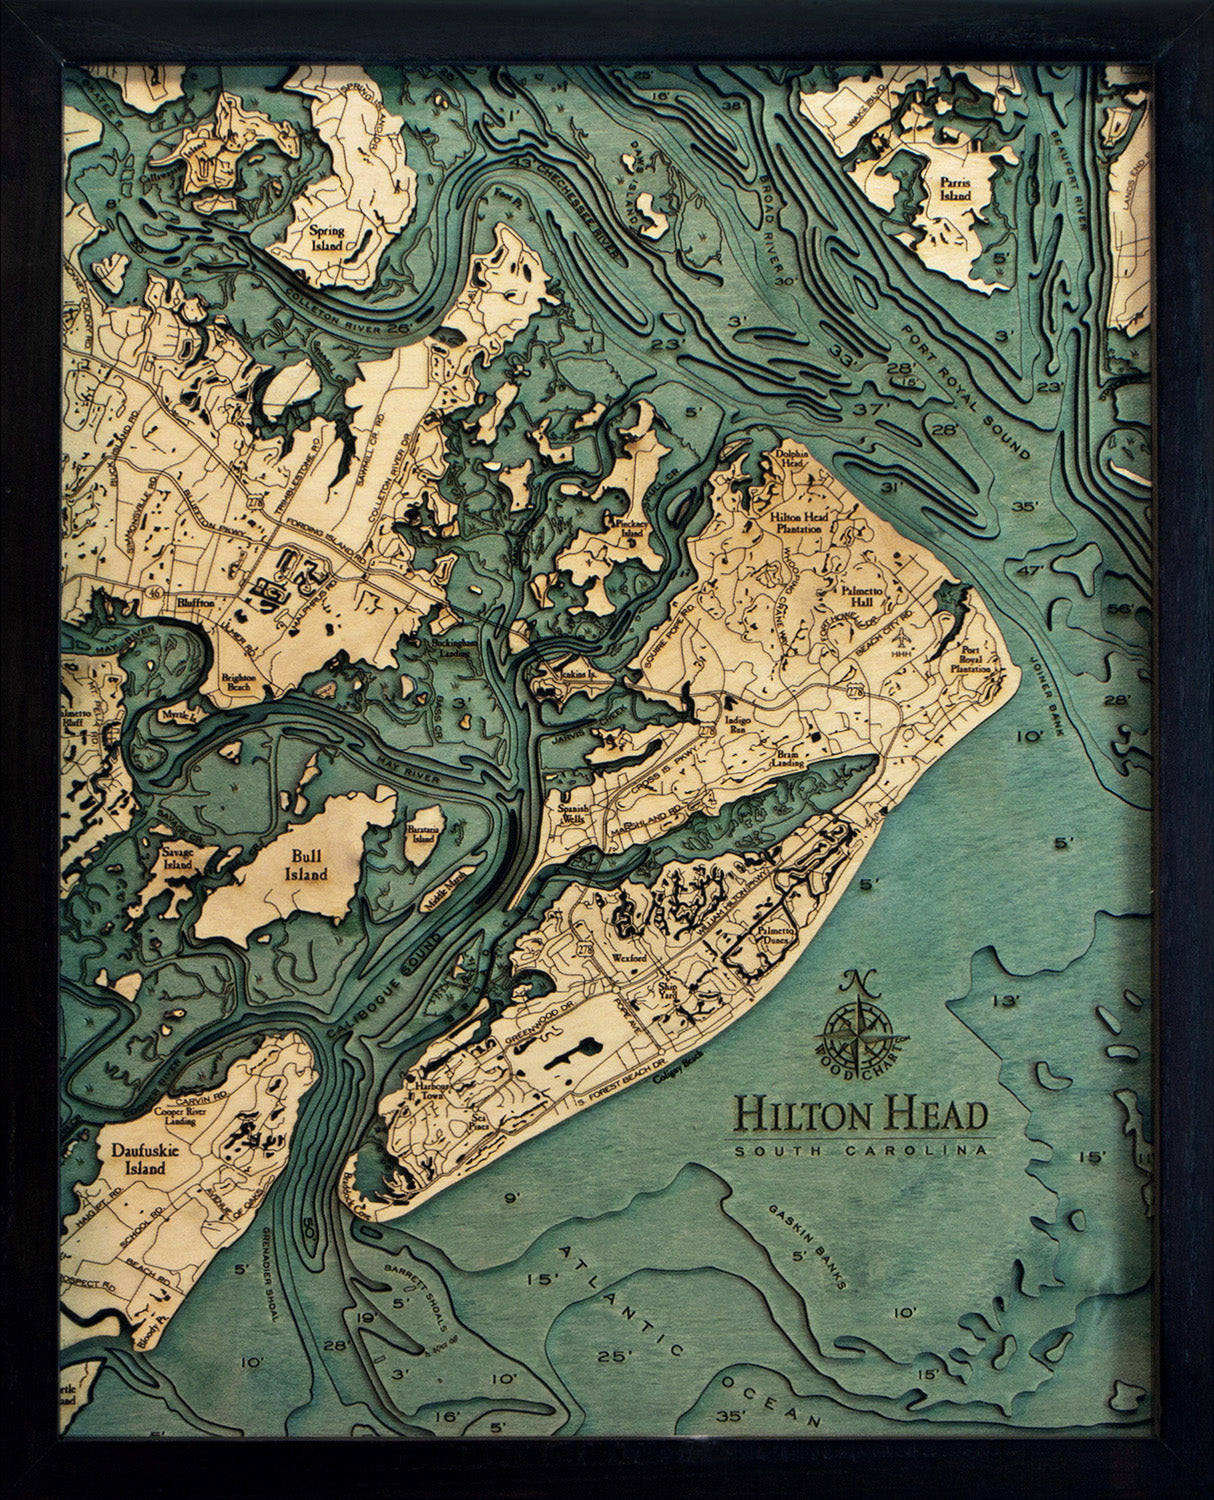 Hilton Head, South Carolina wood chart map made using green and natural colored wood on black background with dark frame